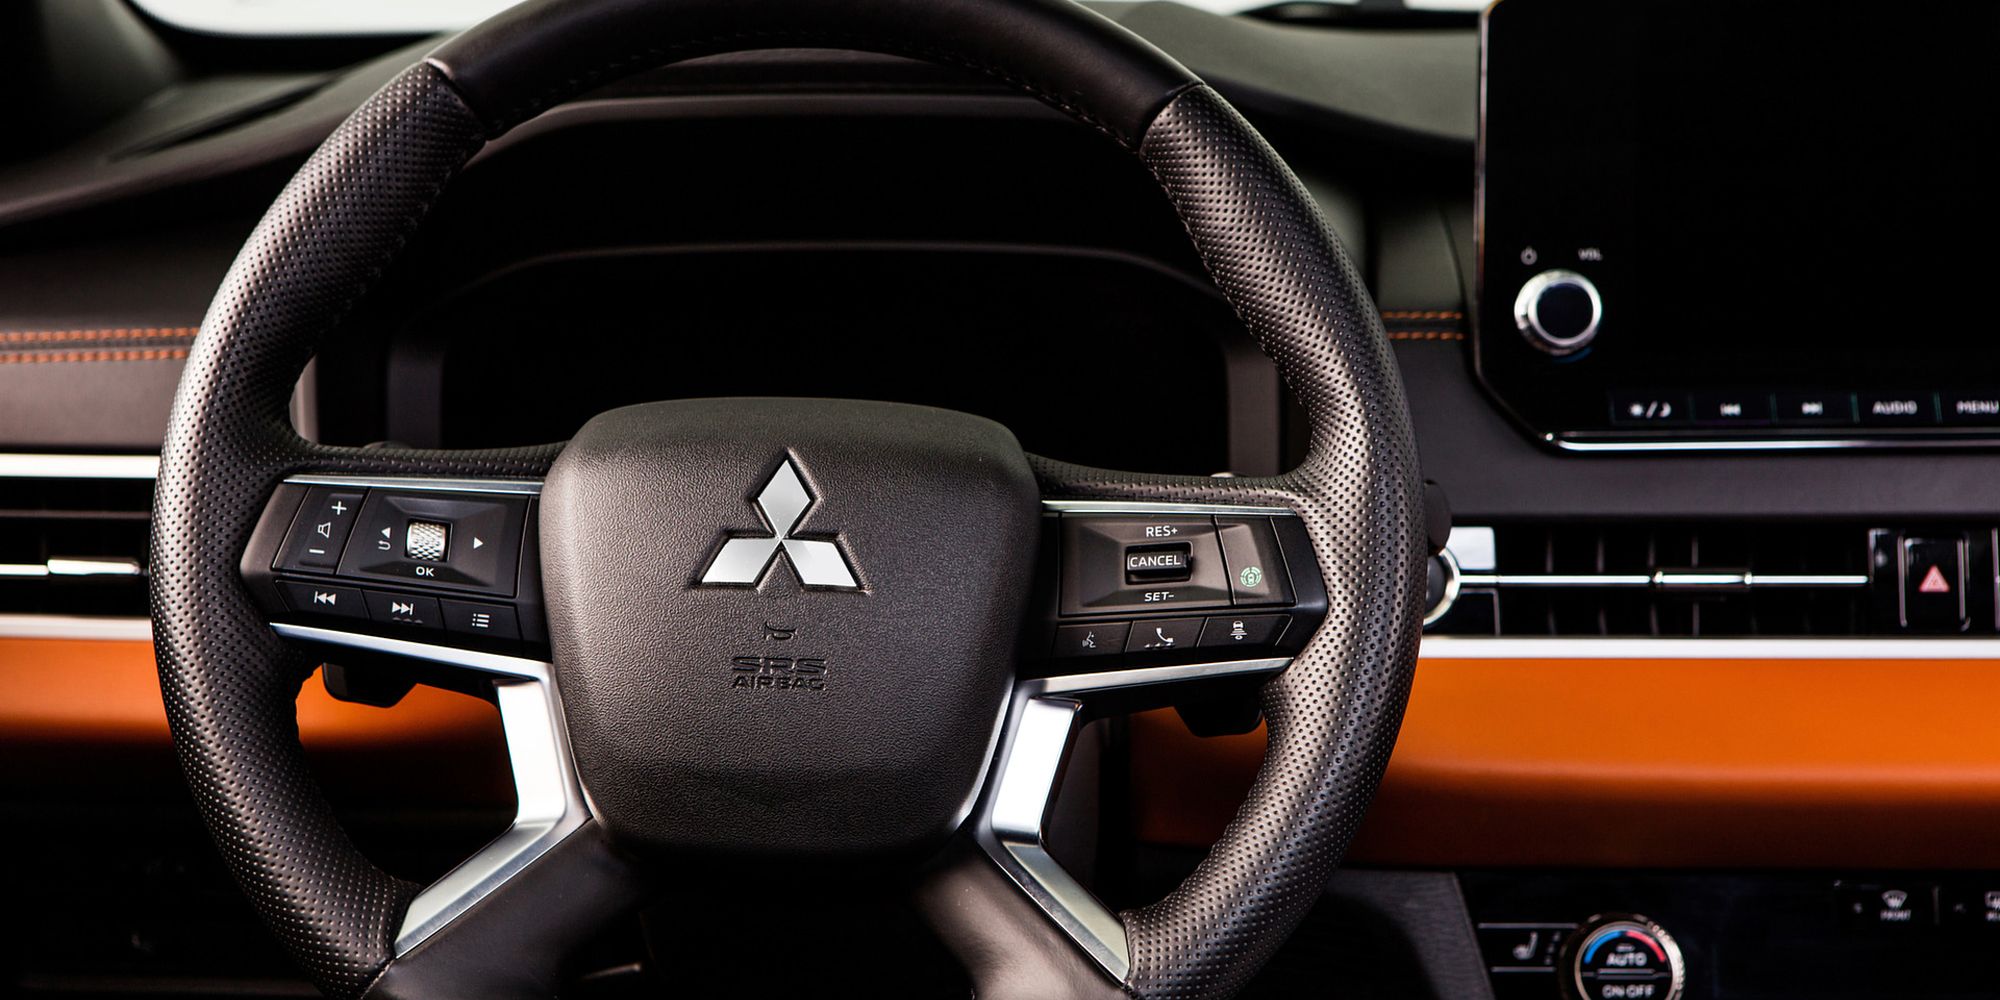 Behind the wheel of the new Outlander